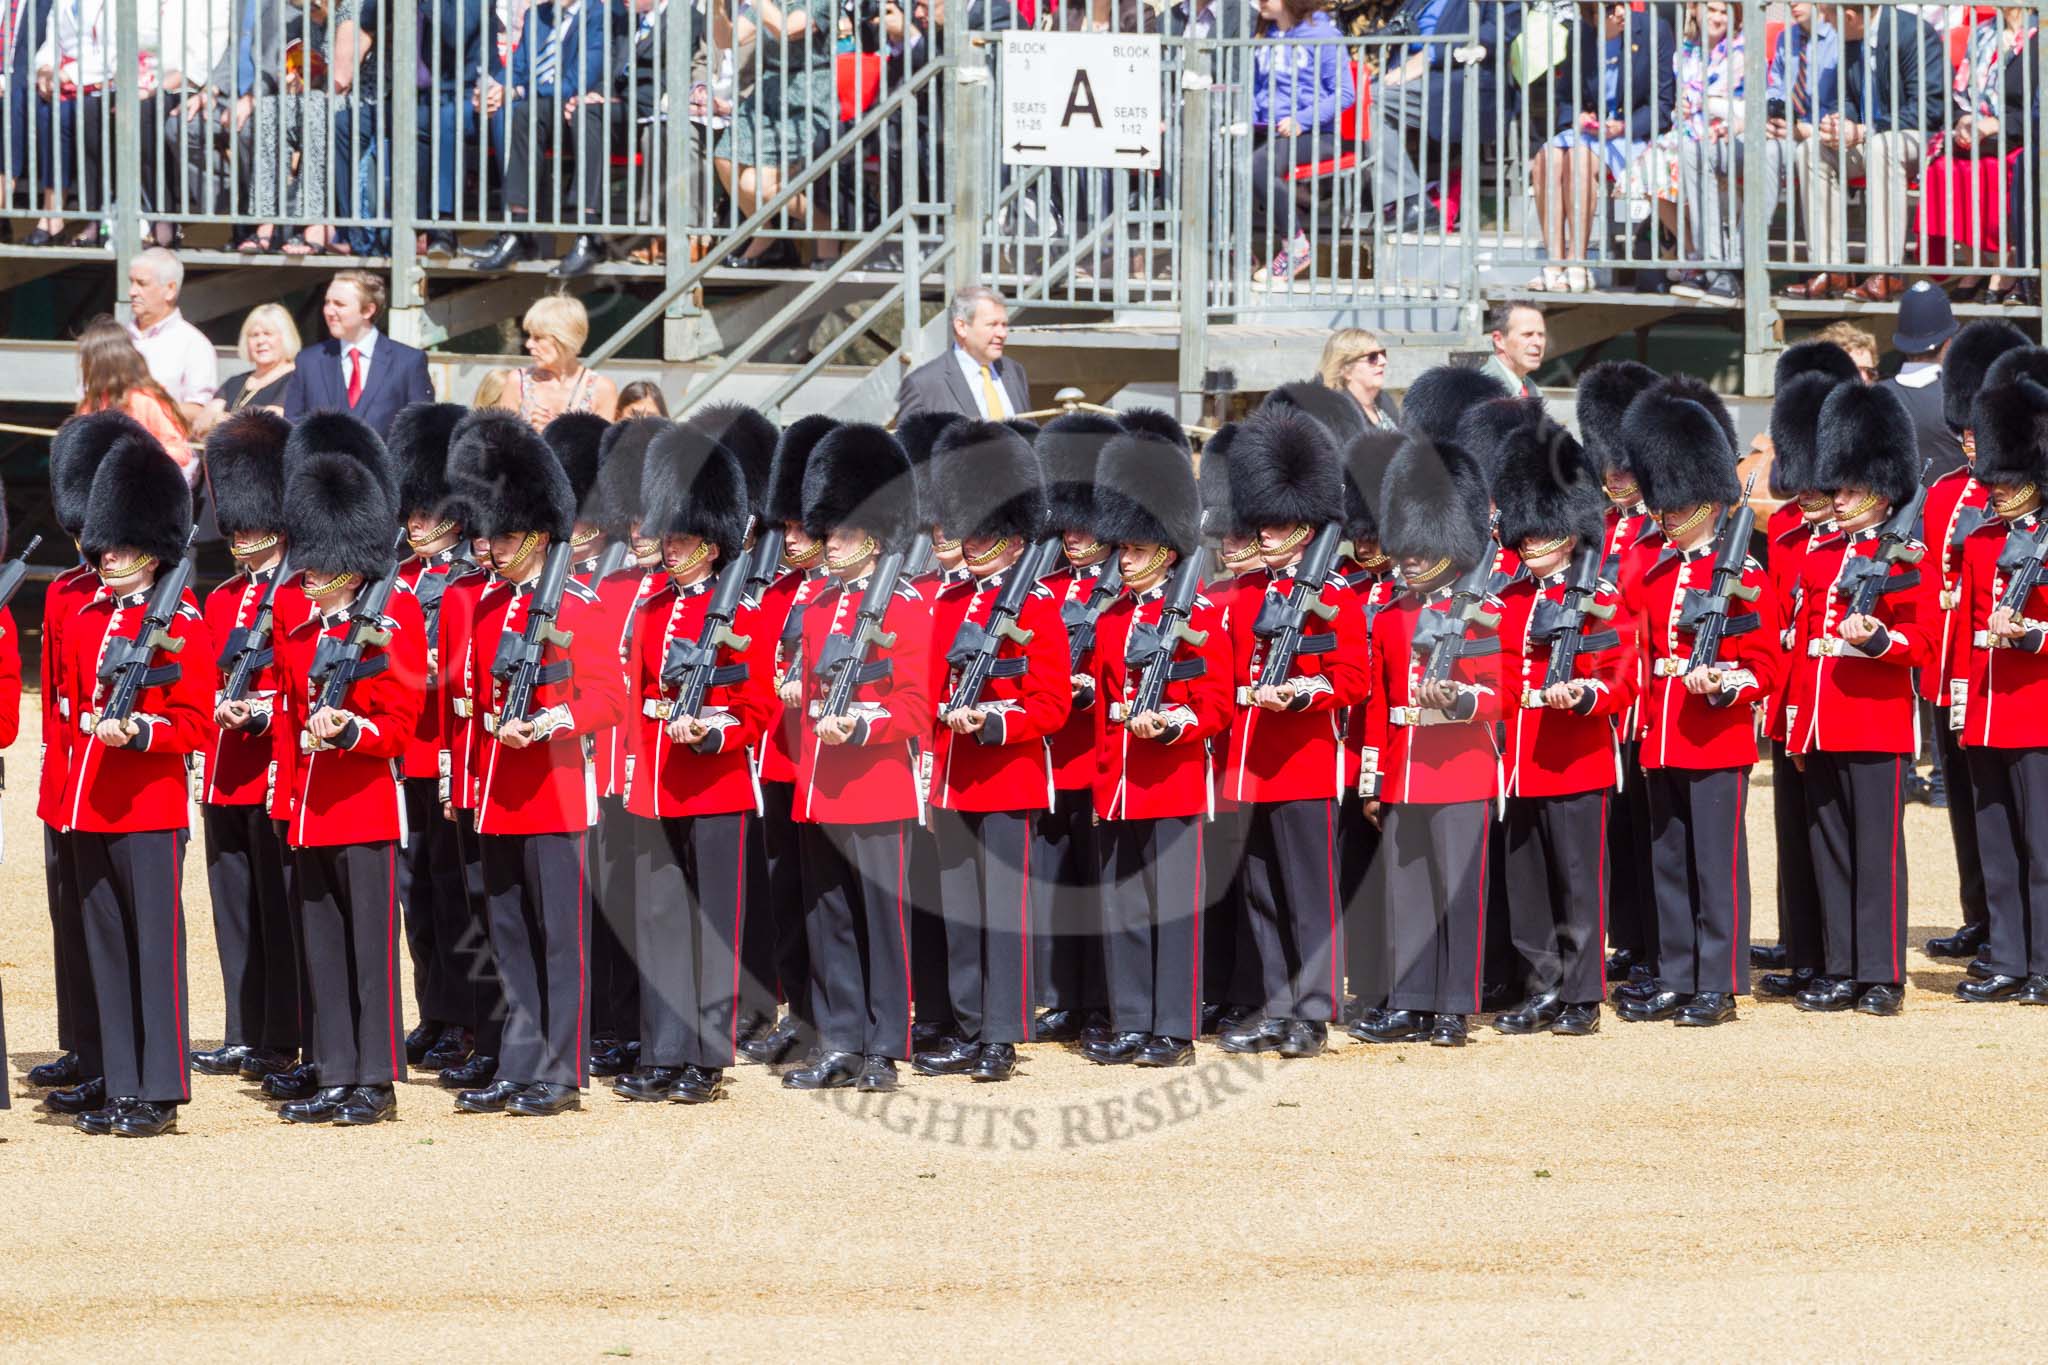 The Colonel's Review 2015.
Horse Guards Parade, Westminster,
London,

United Kingdom,
on 06 June 2015 at 10:26, image #59